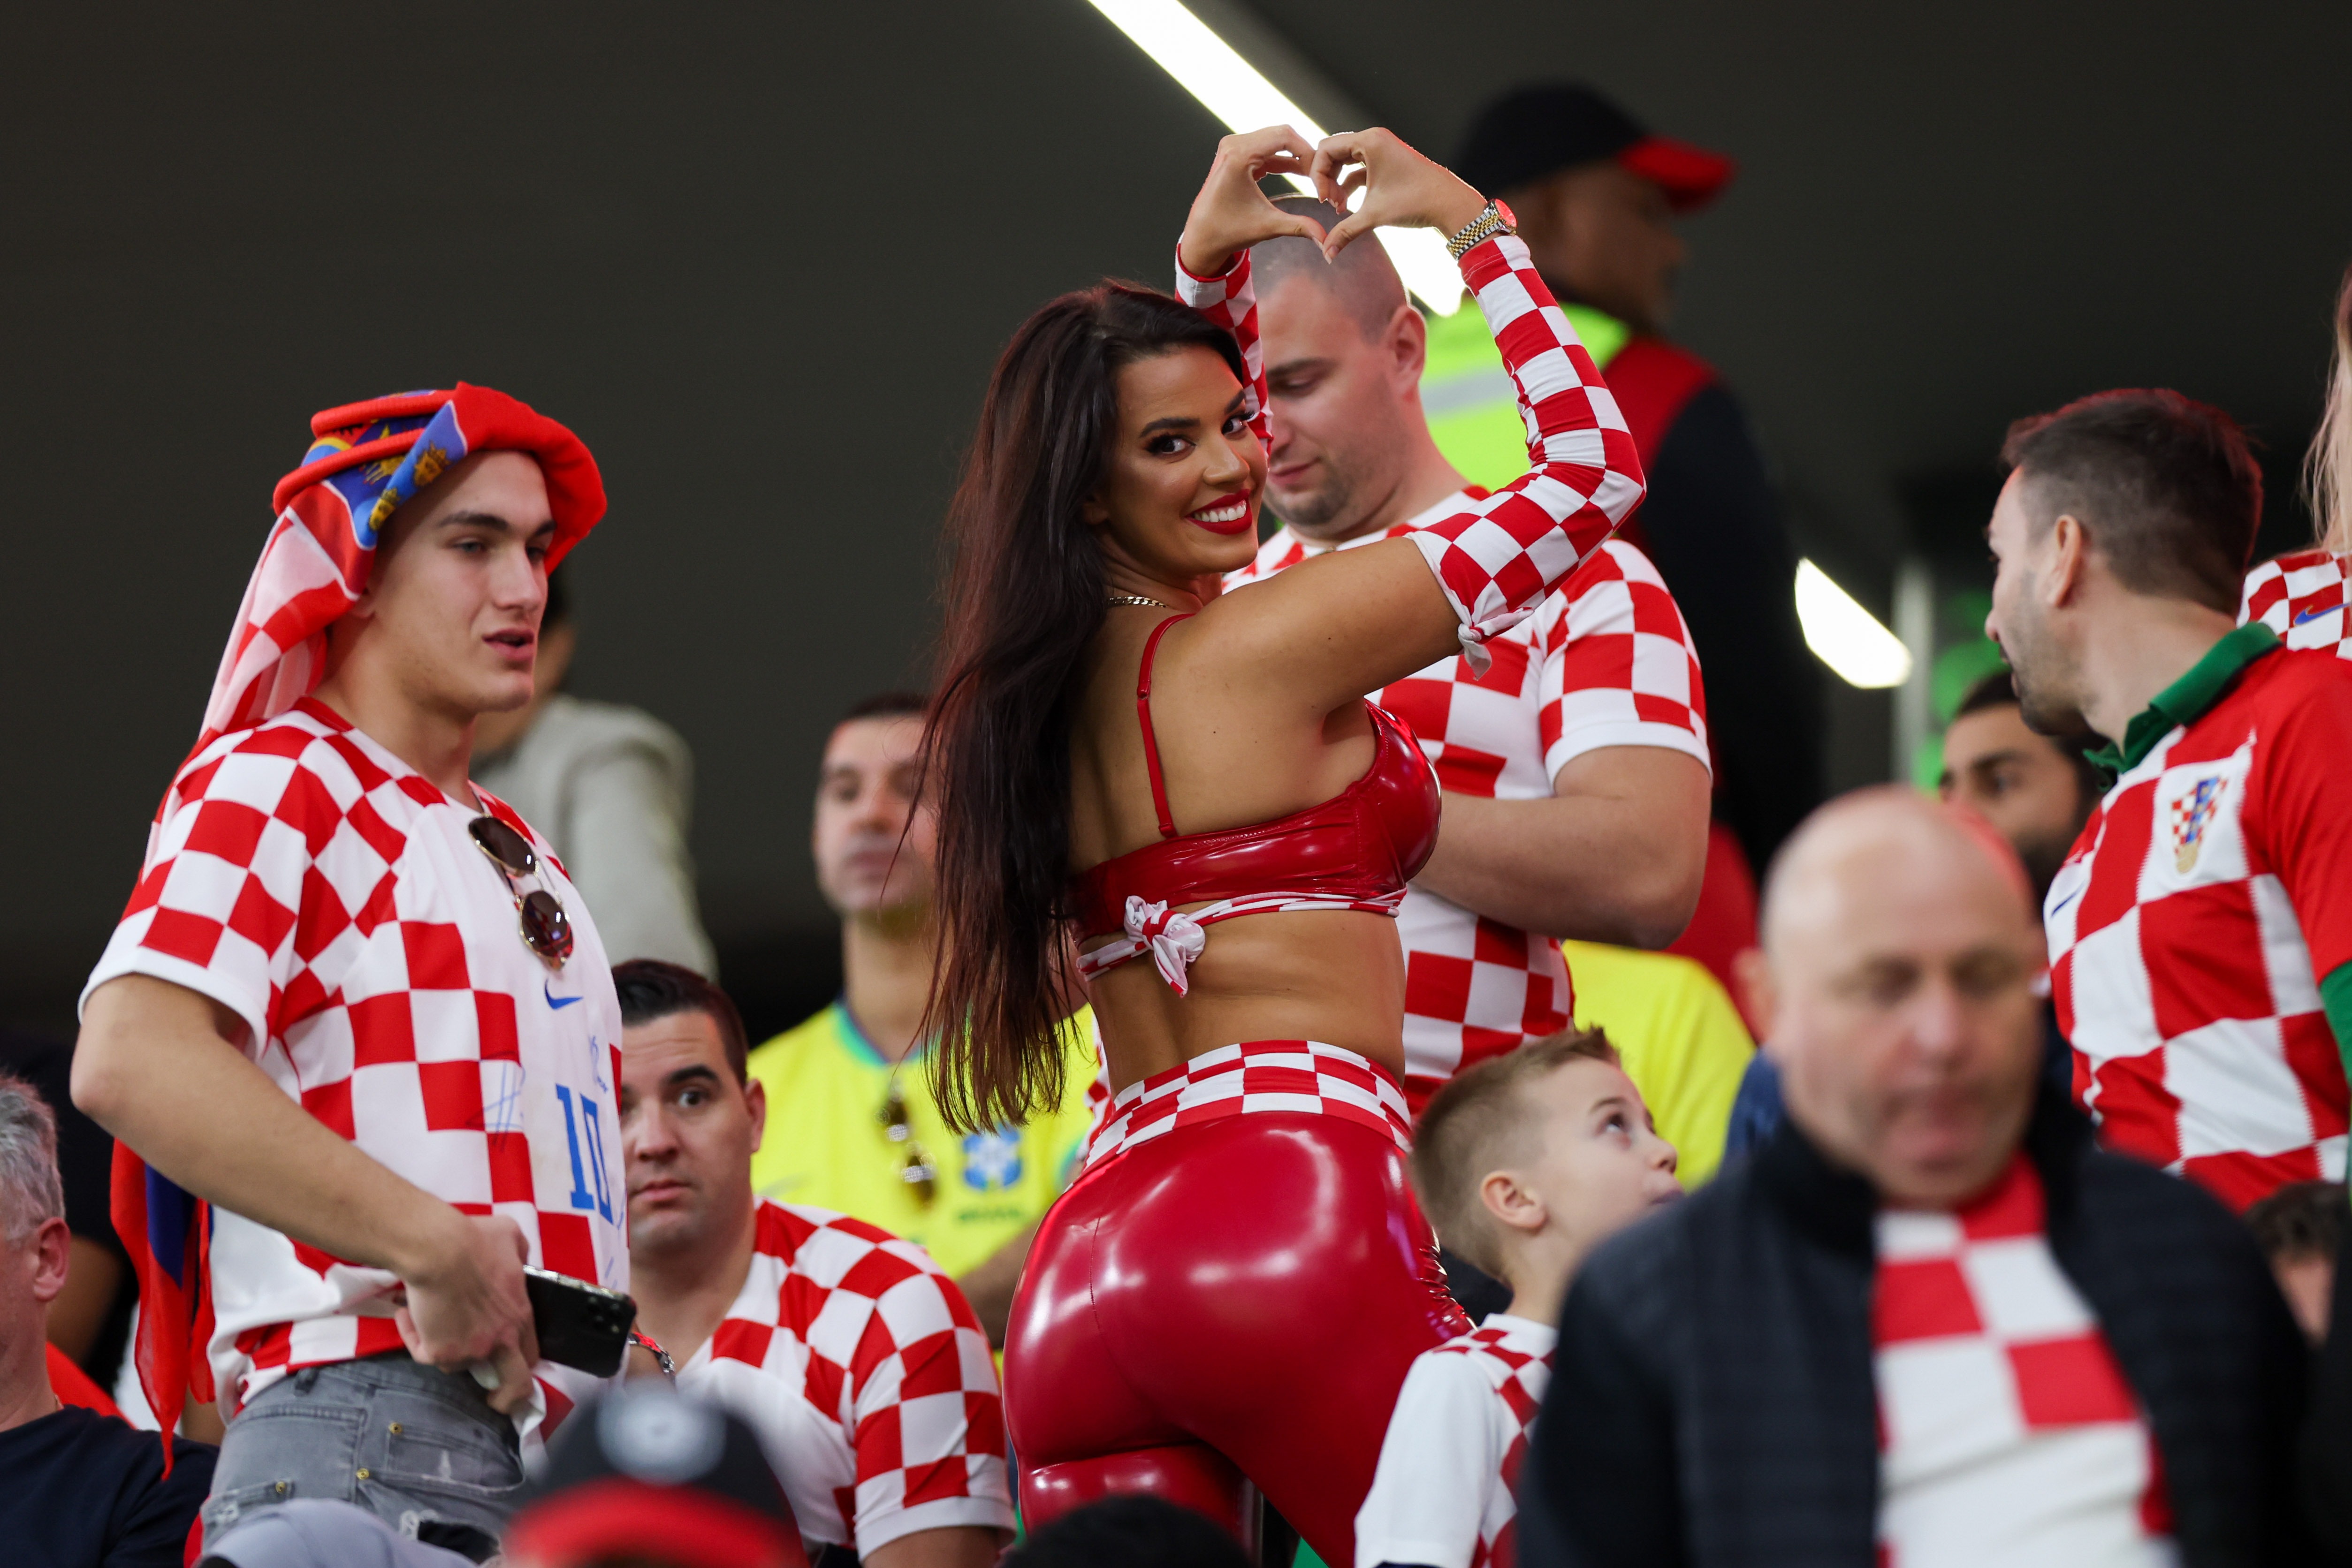 , World Cup’s ‘hottest fan’ Ivana Knoll stuns as ex-Miss Croatia nearly bursts out of her dress in poolside snap